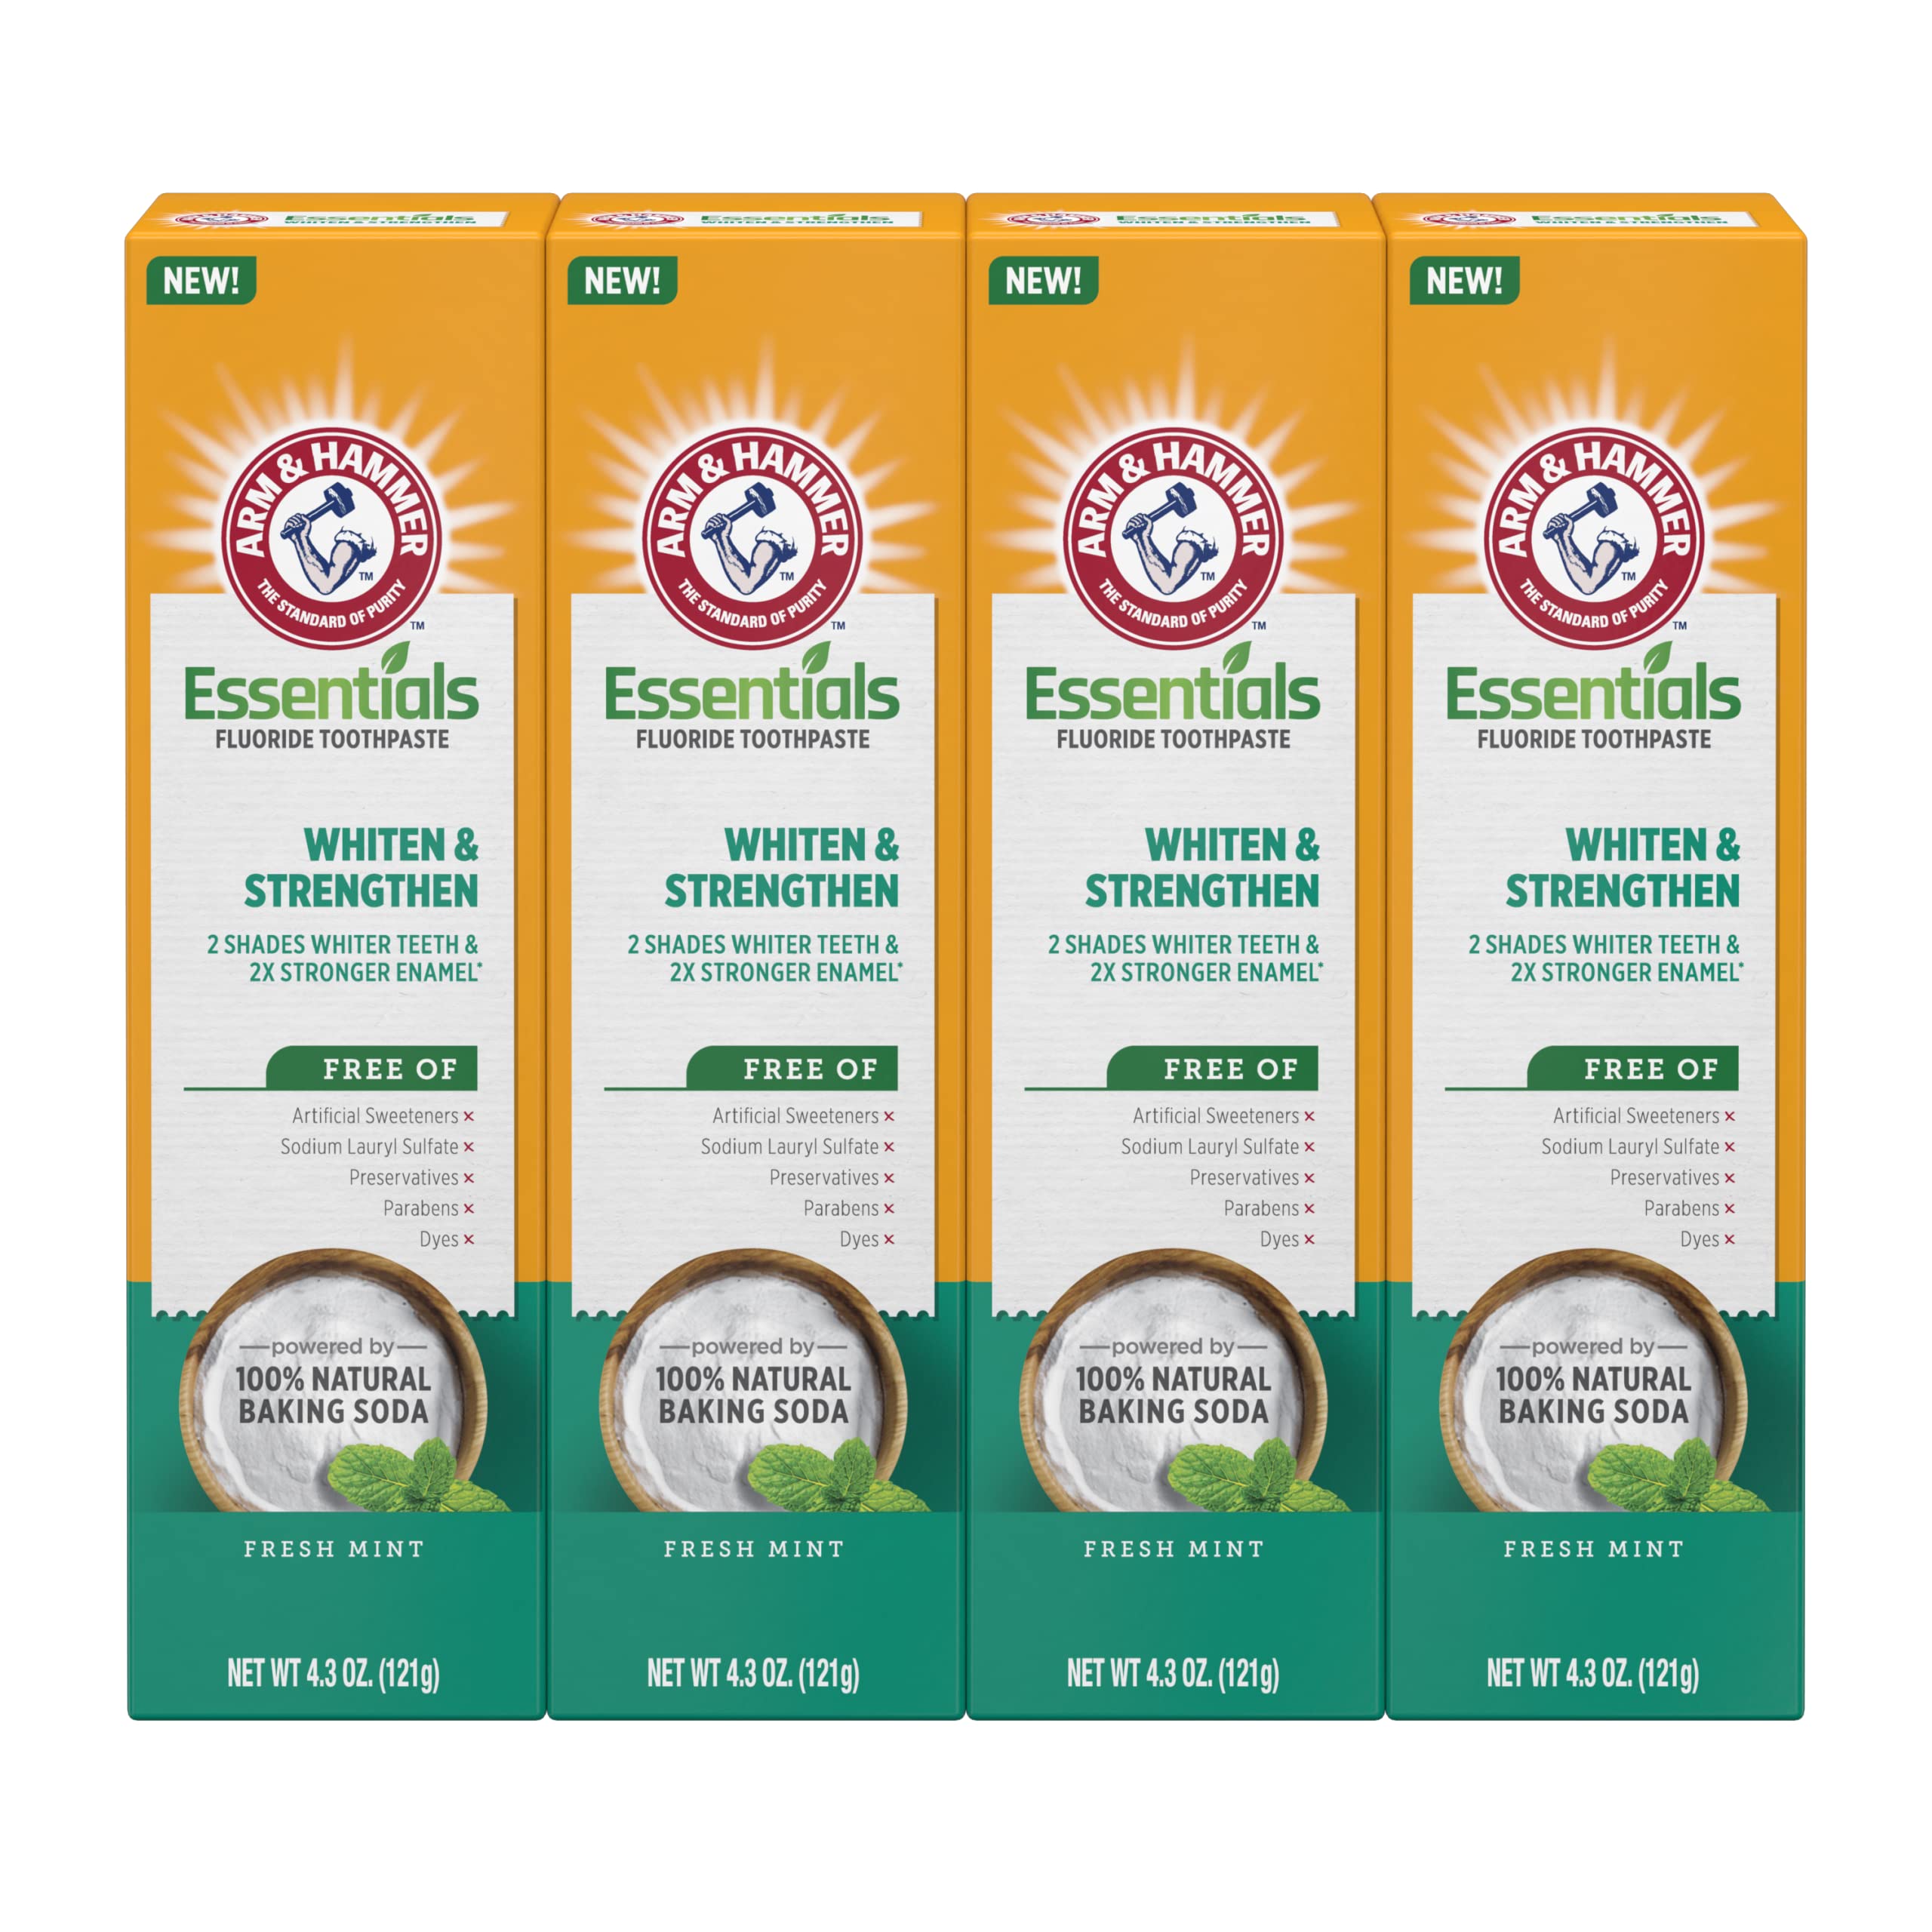 4-Pack 4.3-Oz Arm & Hammer Essentials Whiten & Strengthen Fluoride Toothpaste (Fresh Mint) $9.21 w/ S&S + Free Shipping w/ Prime or on orders over $35